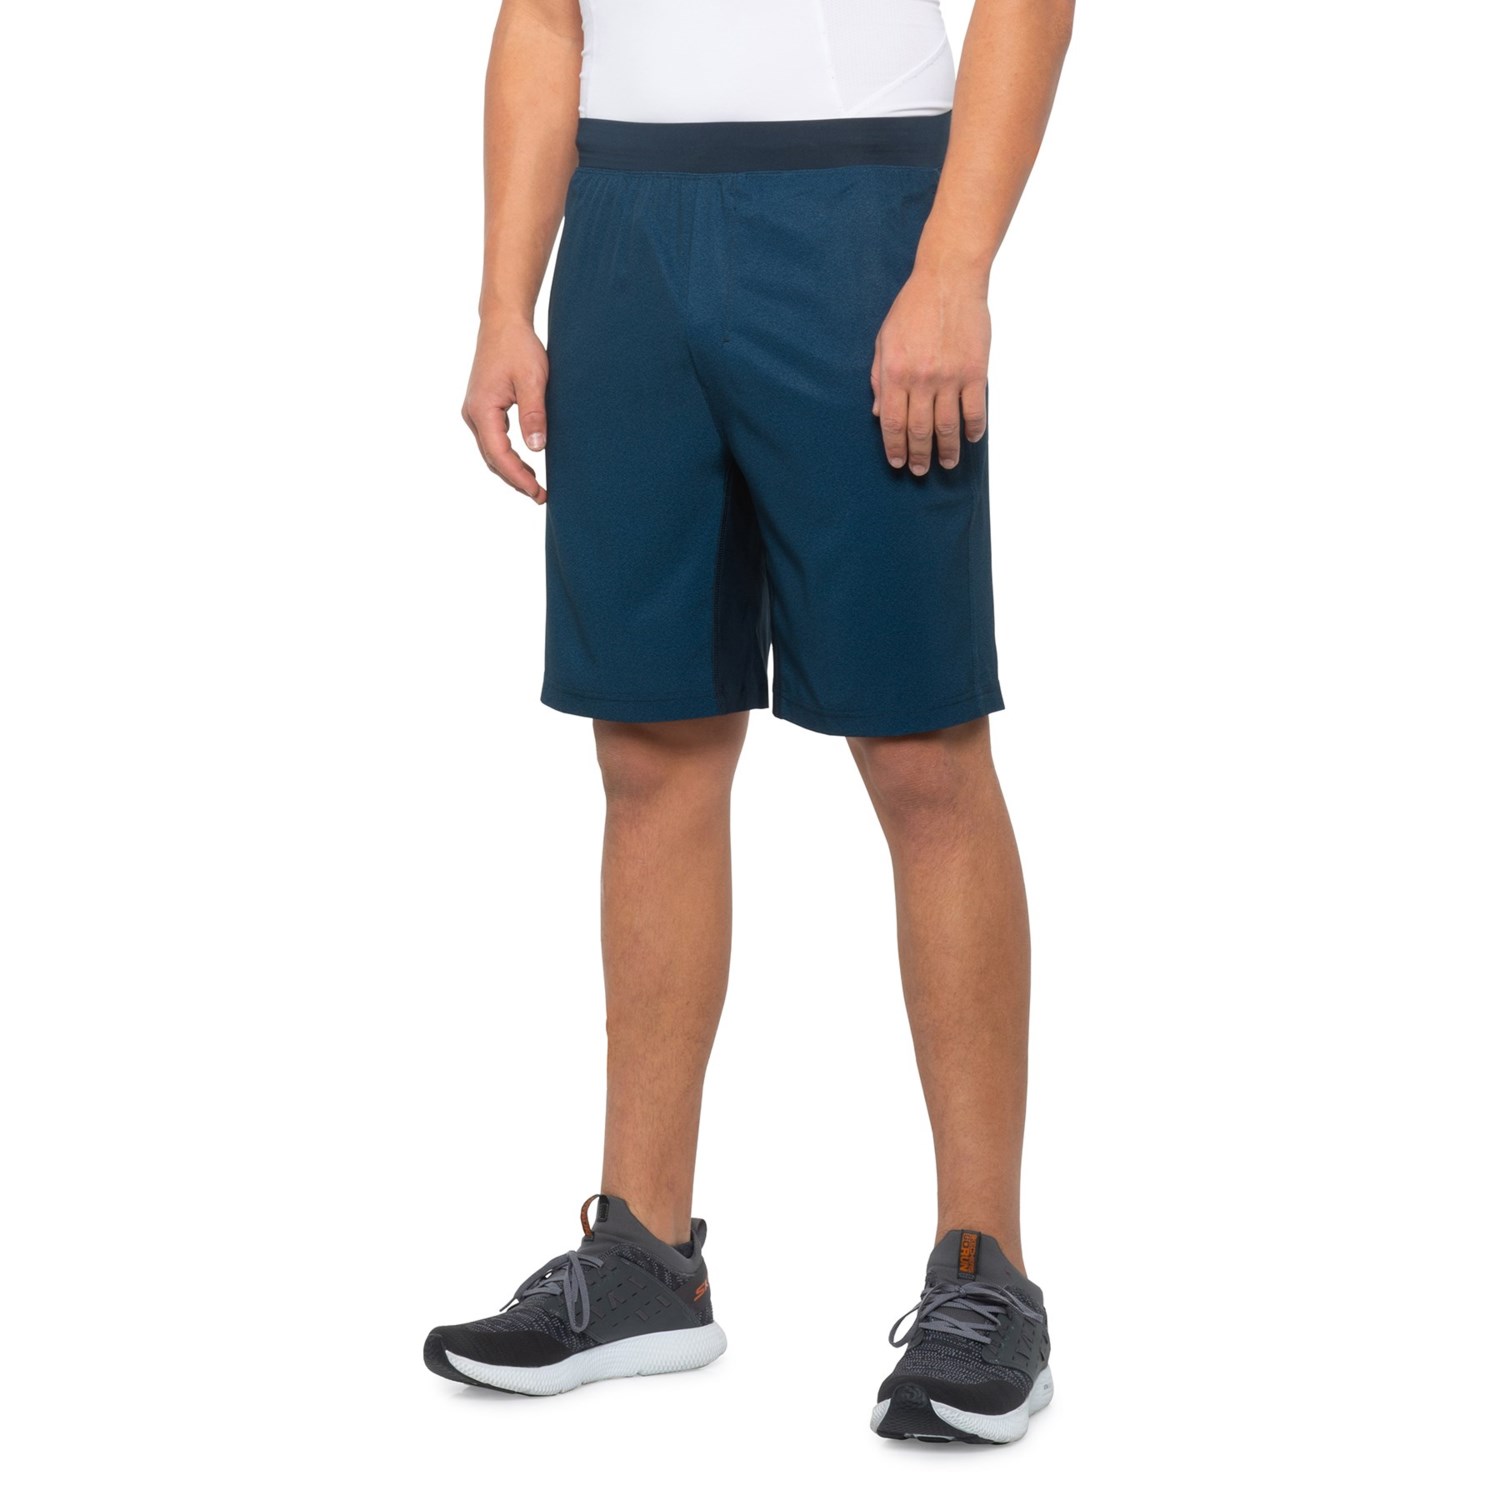 Gaiam Rise Shorts (For Men) - Save 31%